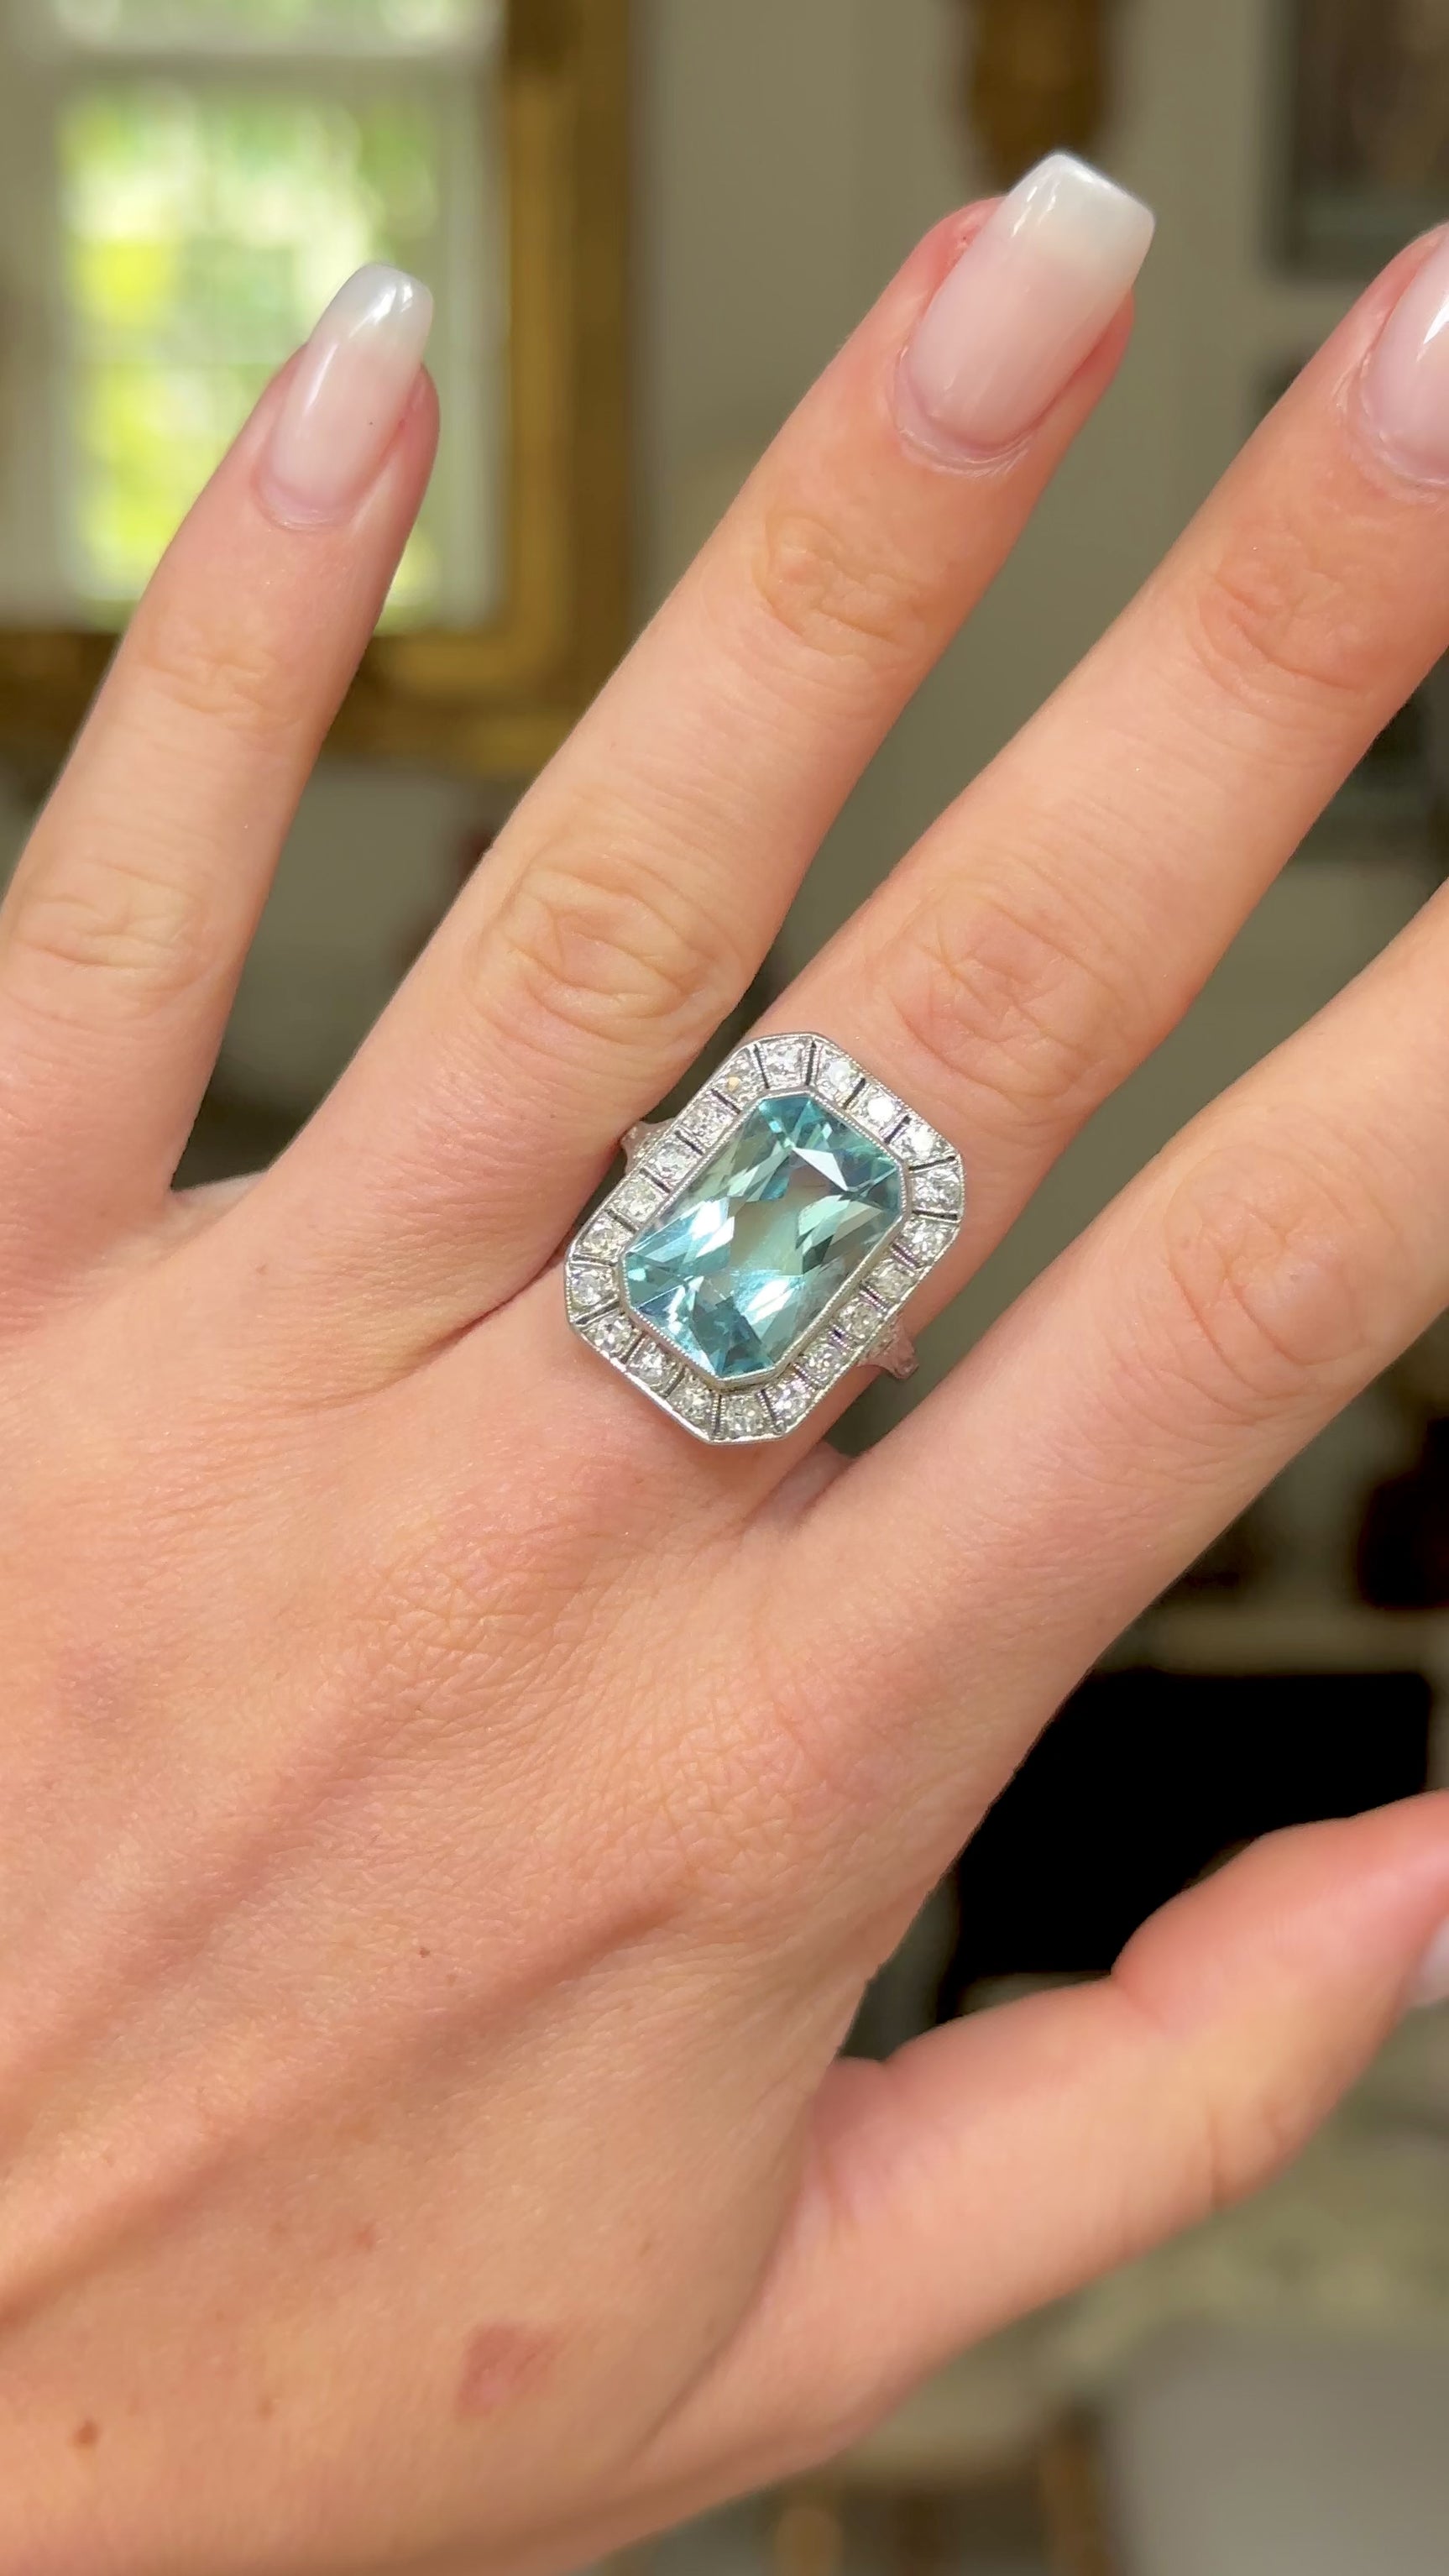 Art Deco aquamarine and diamond cluster ring, worn on hand and moved around to give perspective.